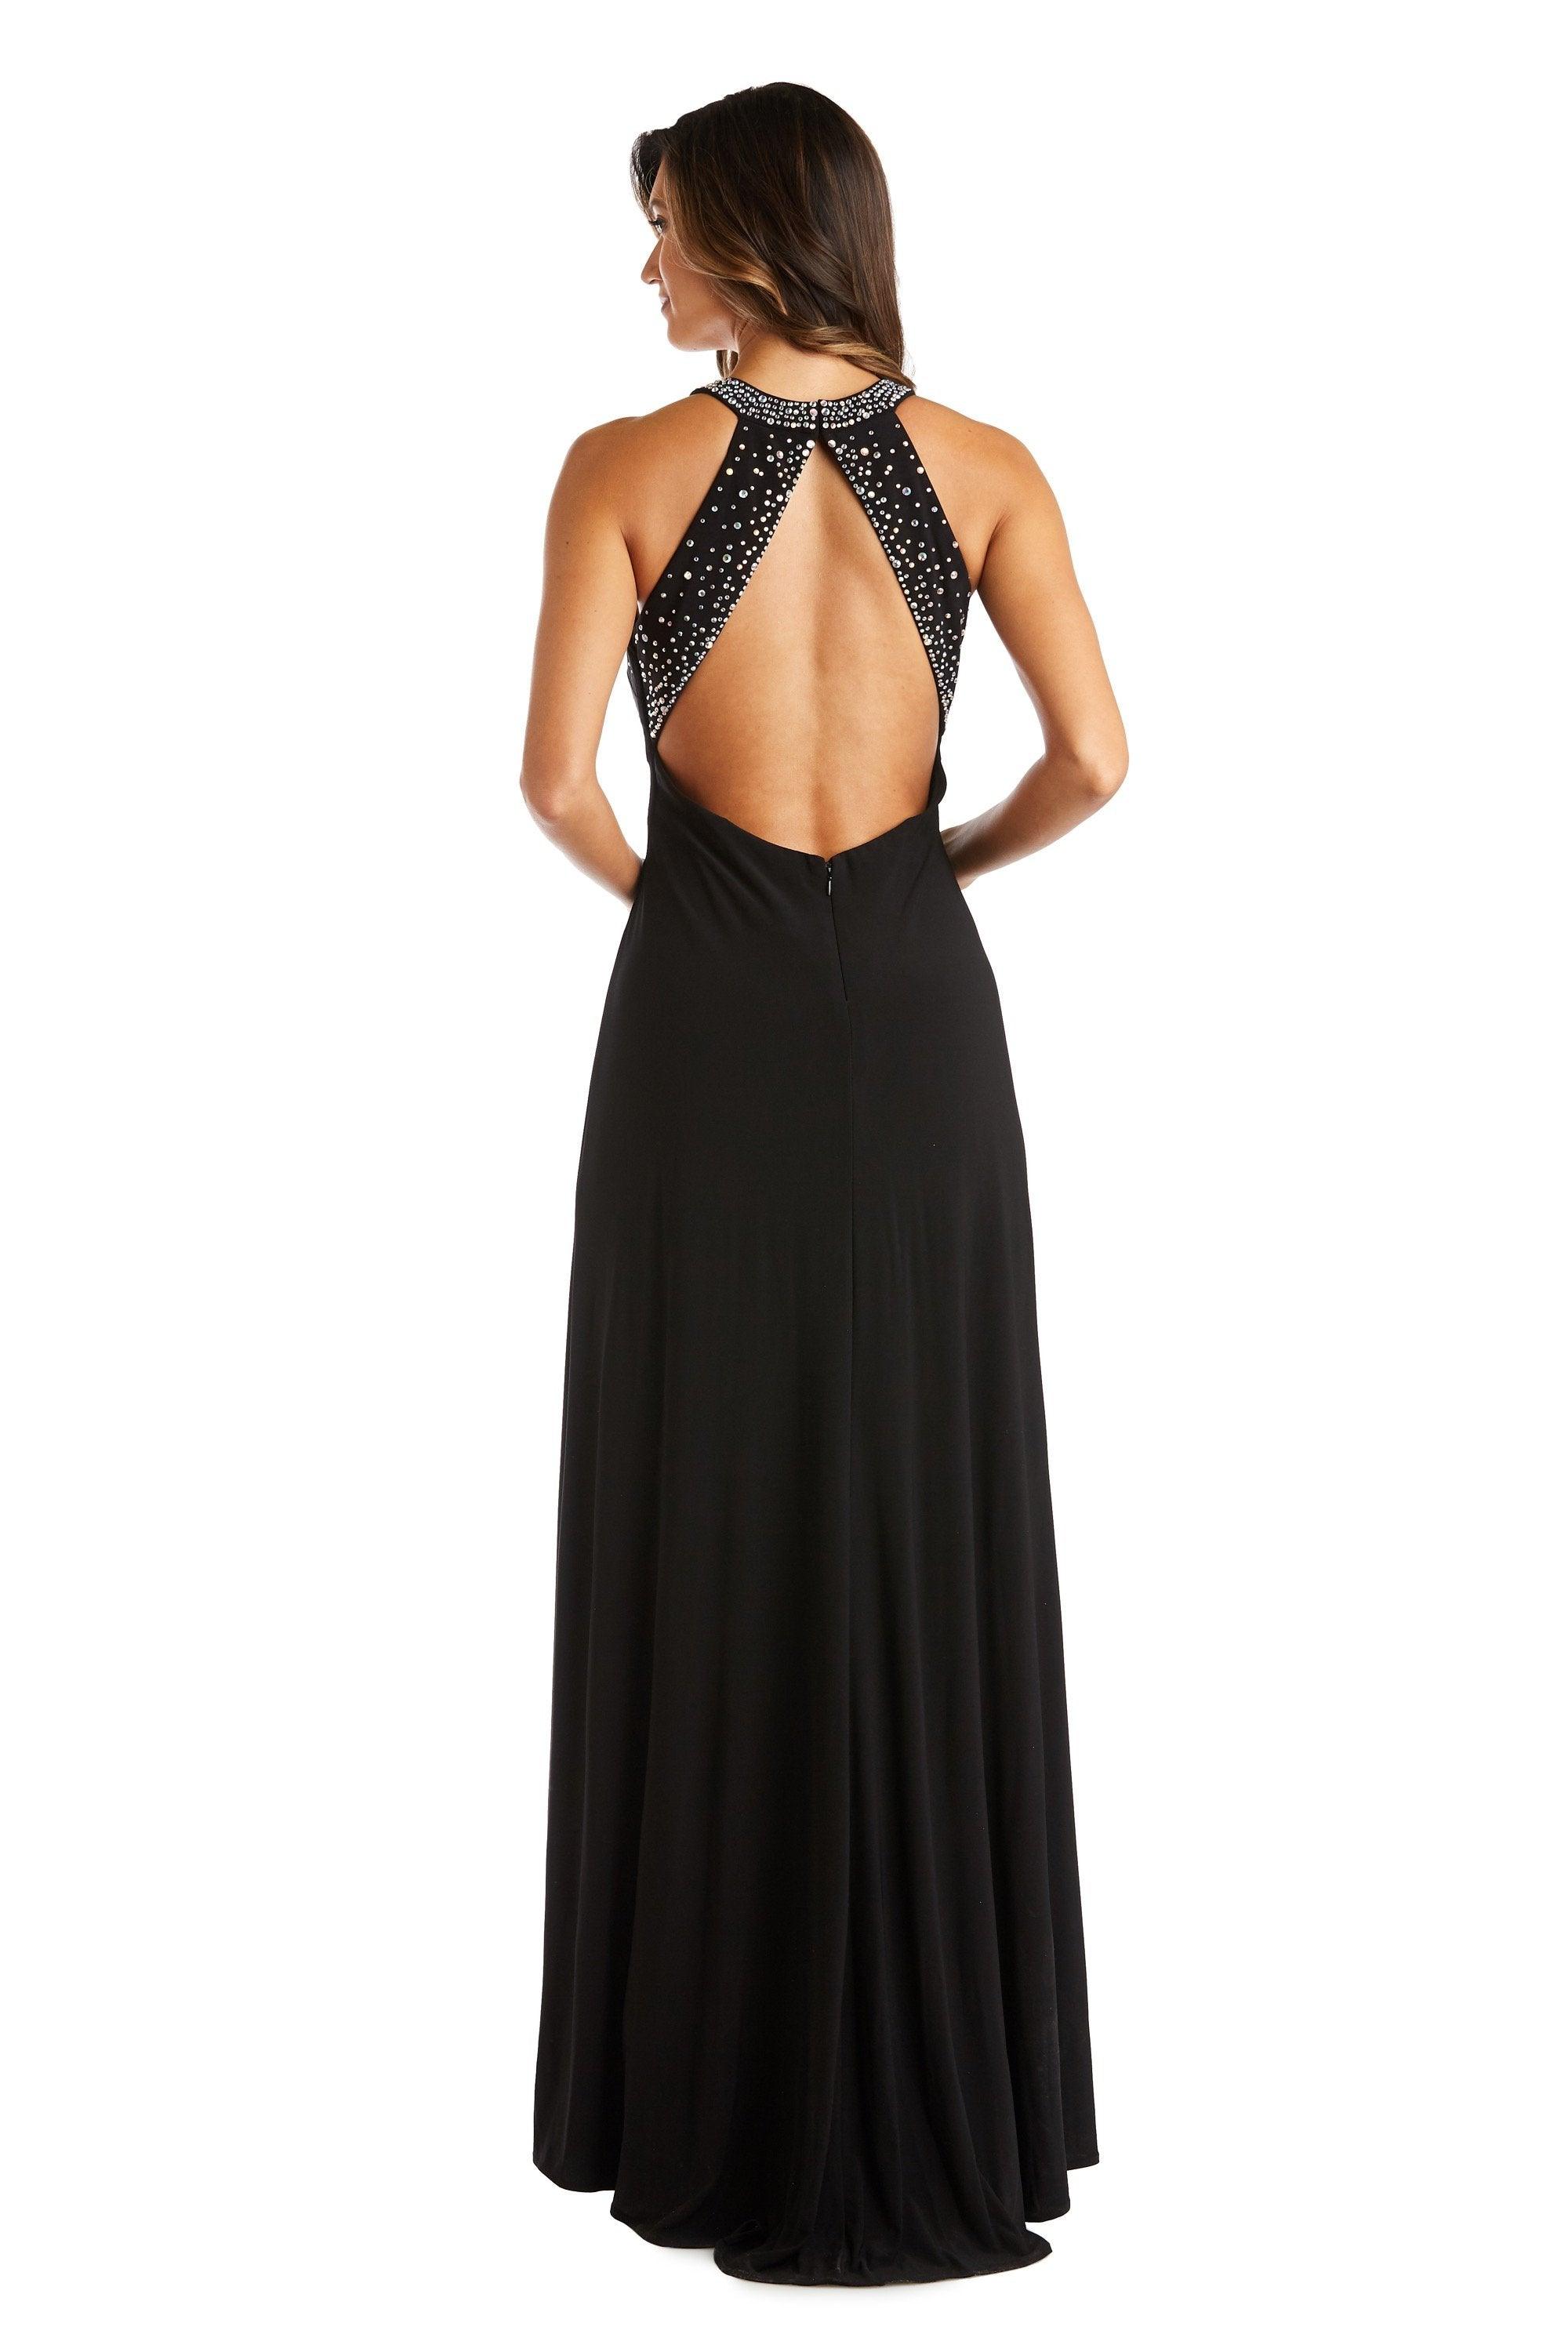 Nightway Long Formal Dress 21634 - The Dress Outlet